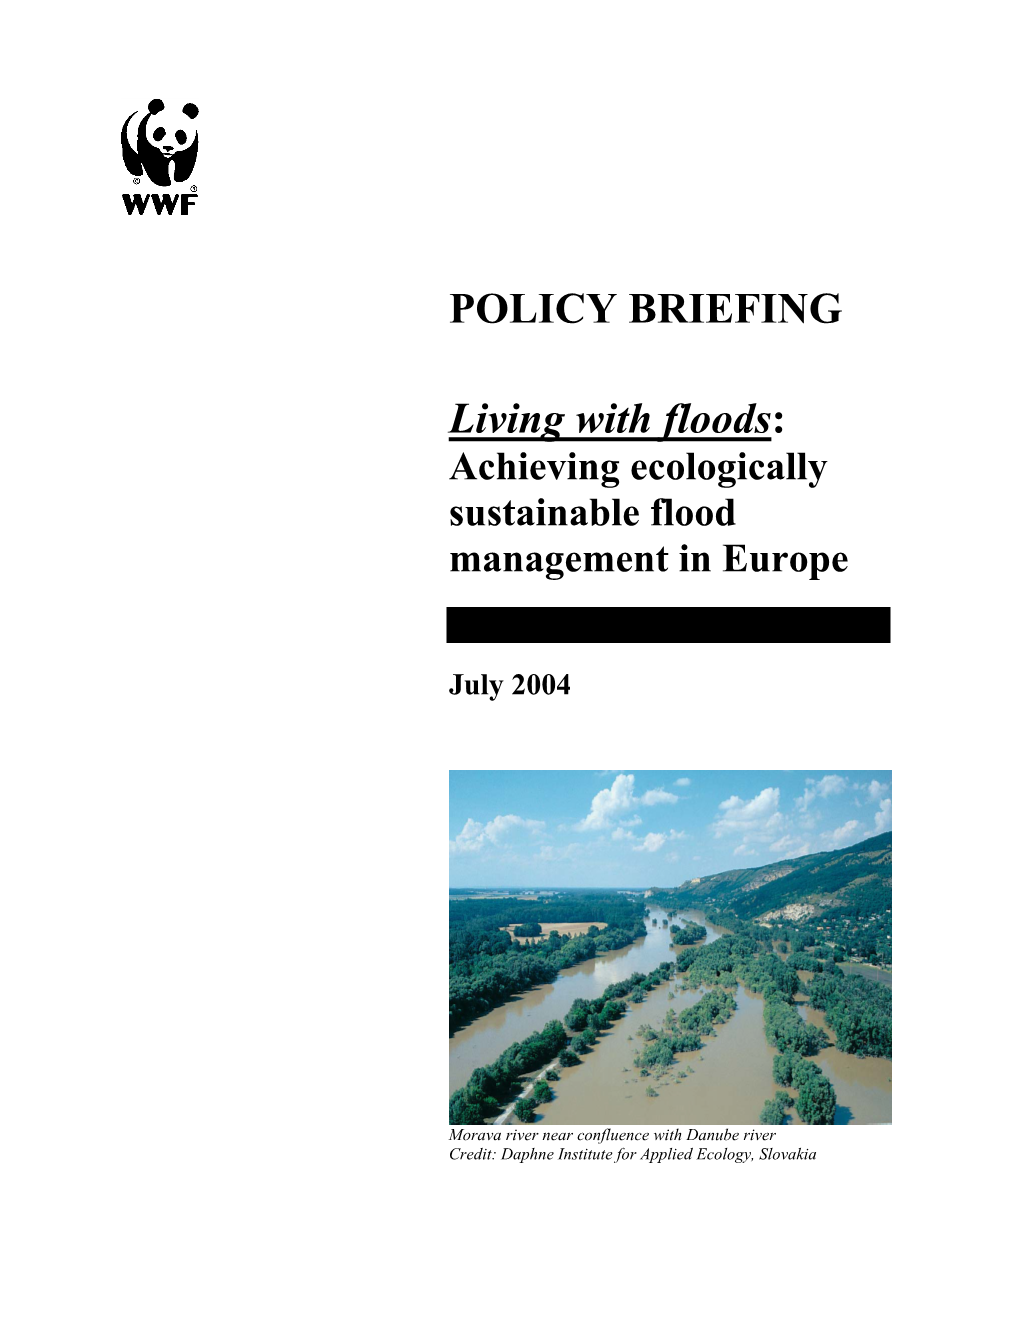 WWF Policy Briefing: Living with Floods